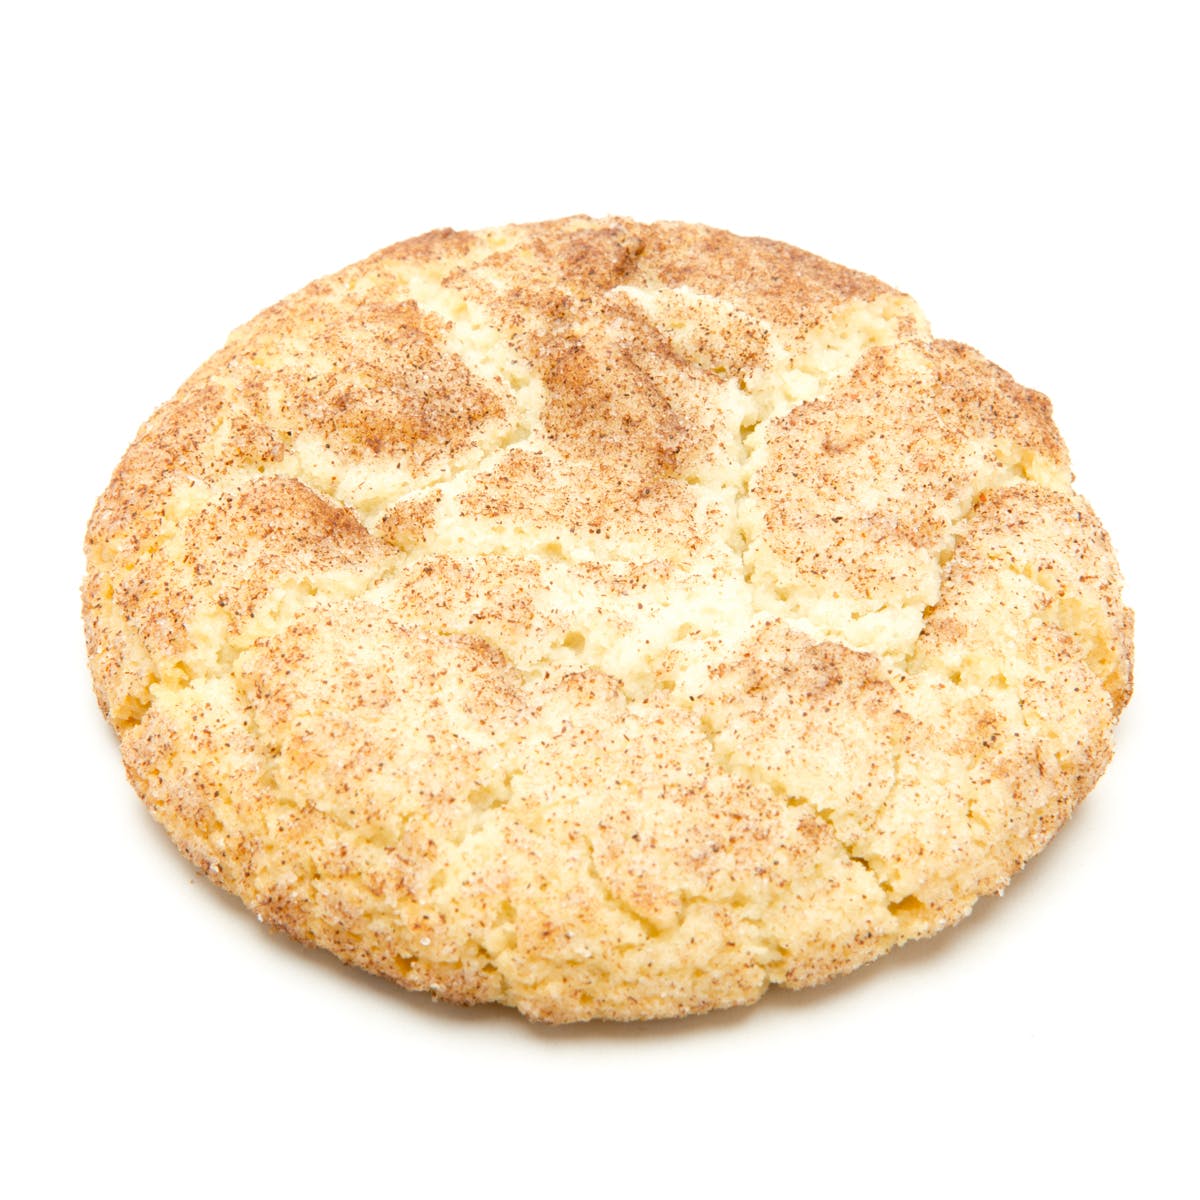 edible-snickerdoodle-cookie-200mg